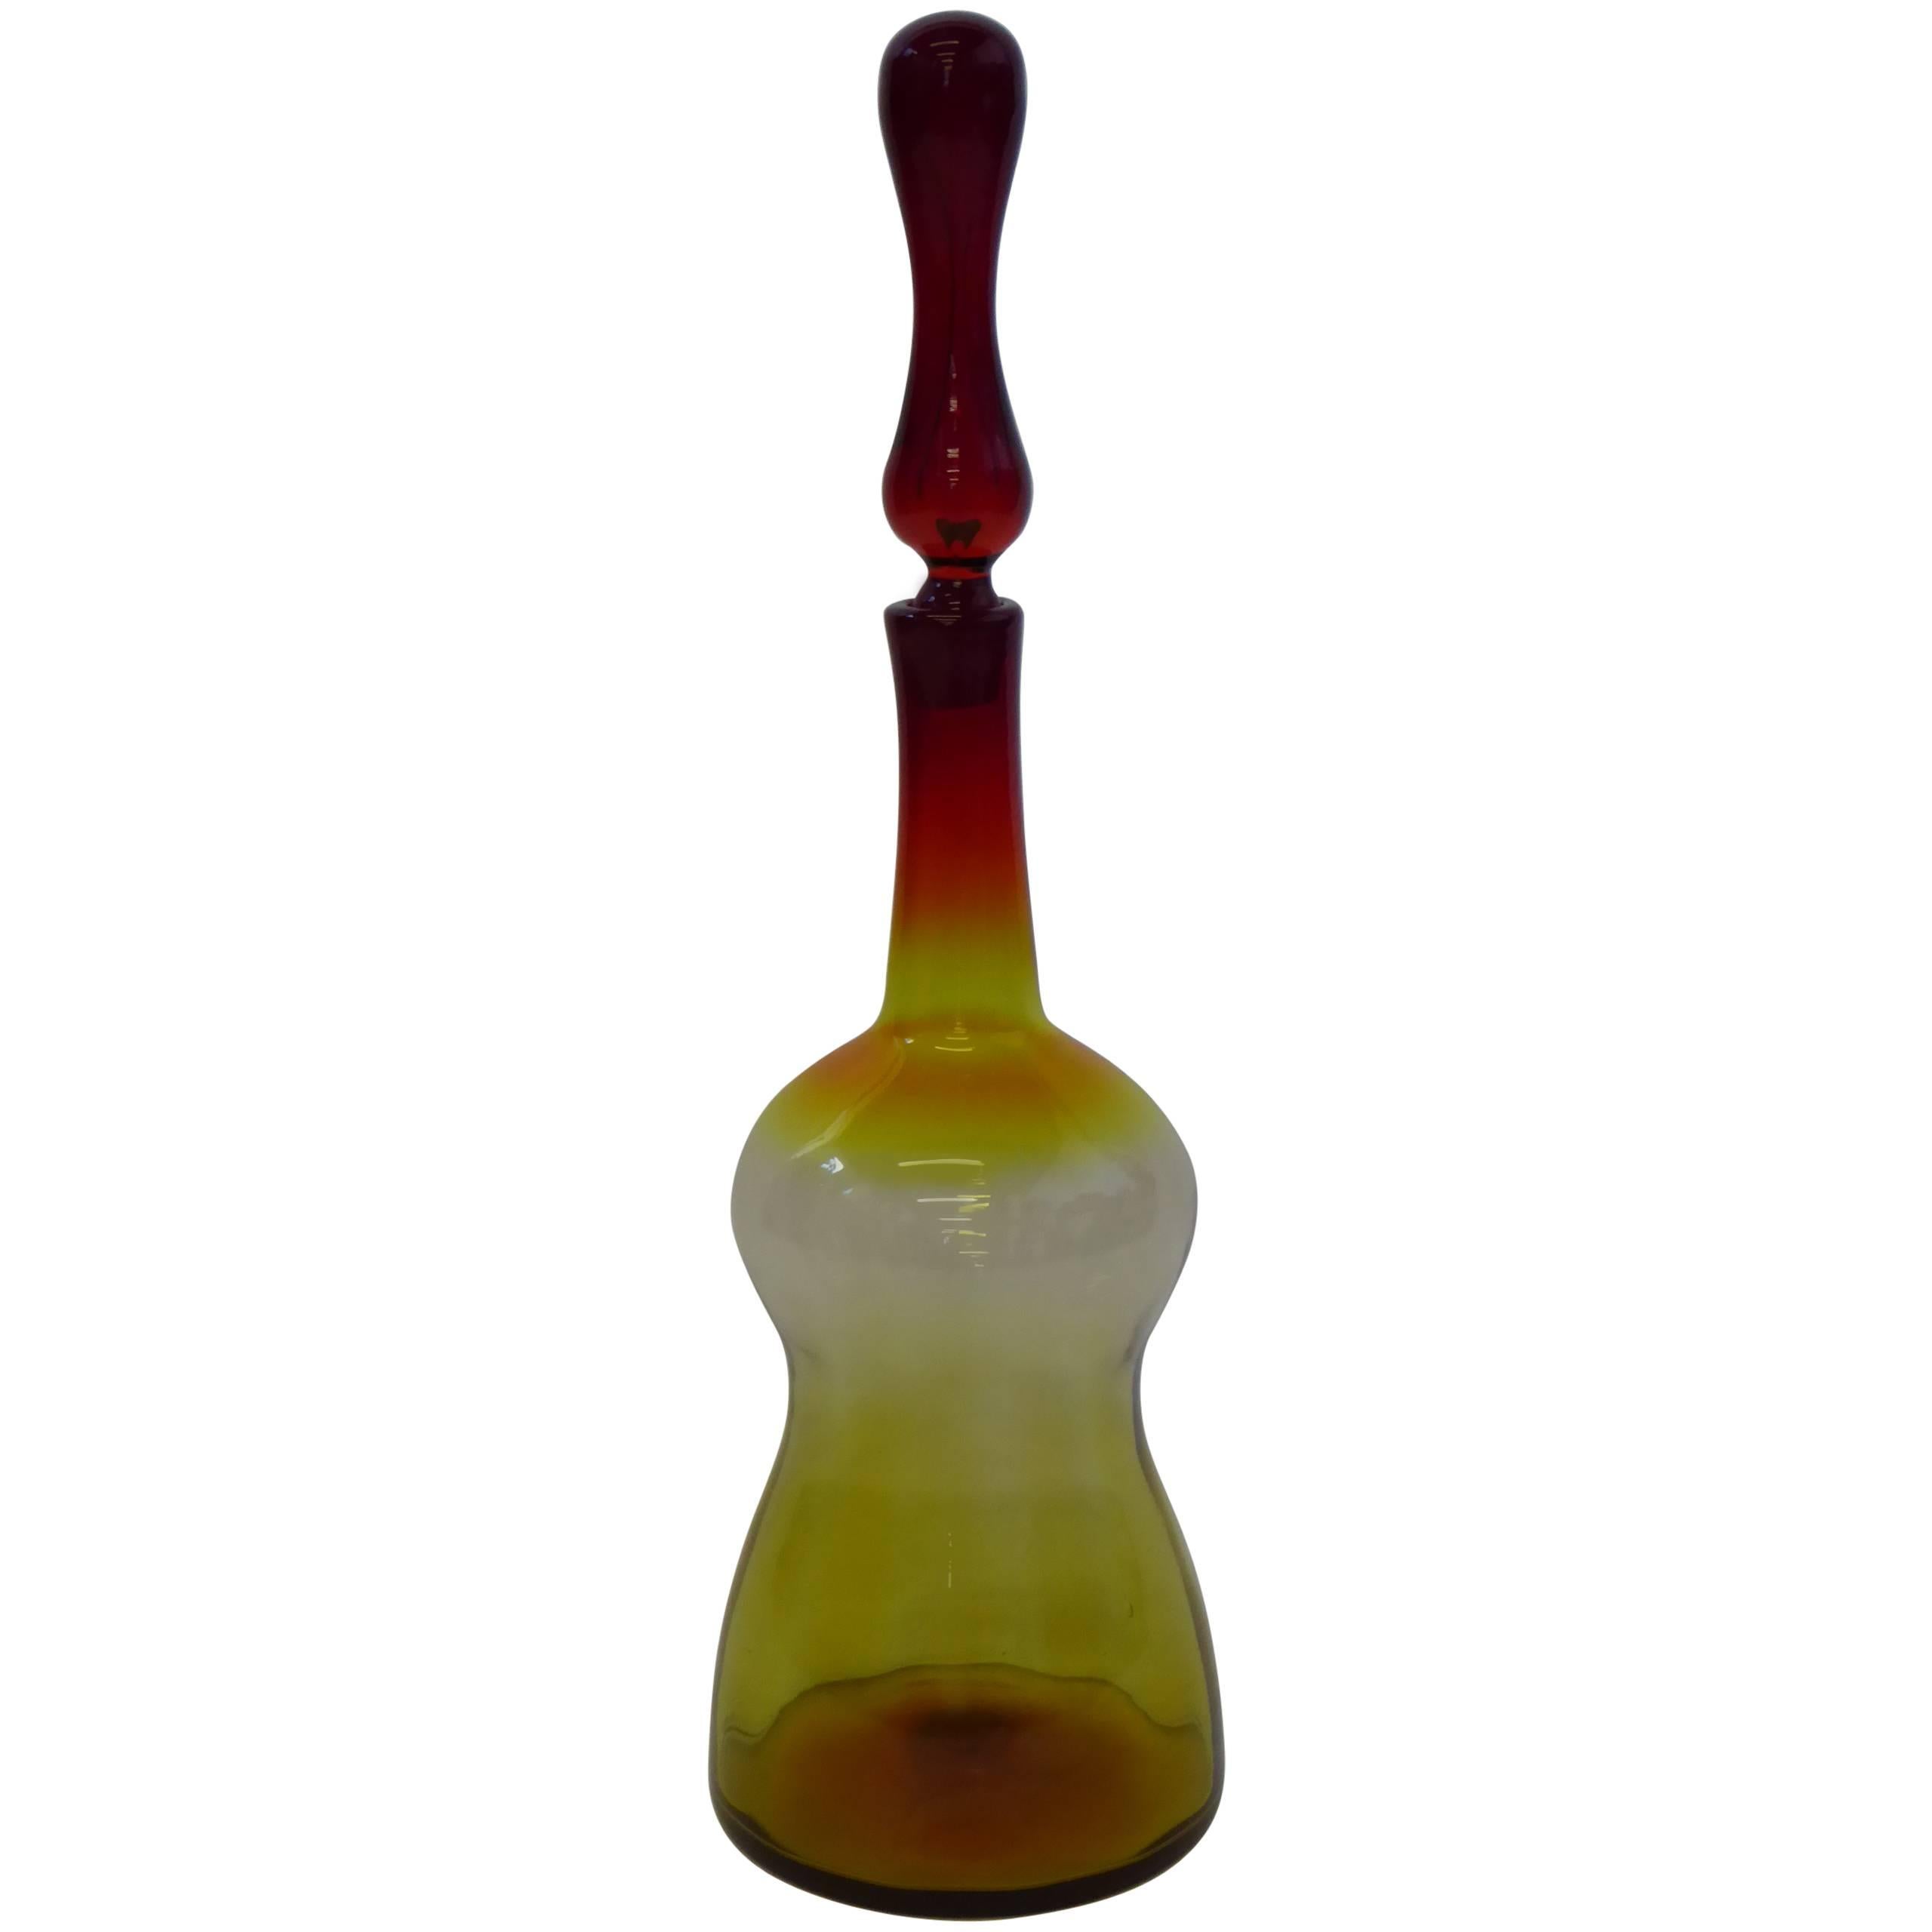 REDUCED FROM $650....Wonderful and large mid-century blown glass floor decanter by Joel Myers for Blenko of West Virginia. In mixed color Amberina, called Tangerine by Blenko, which is red melding into an orange yellow tone.   Very elegant and eye